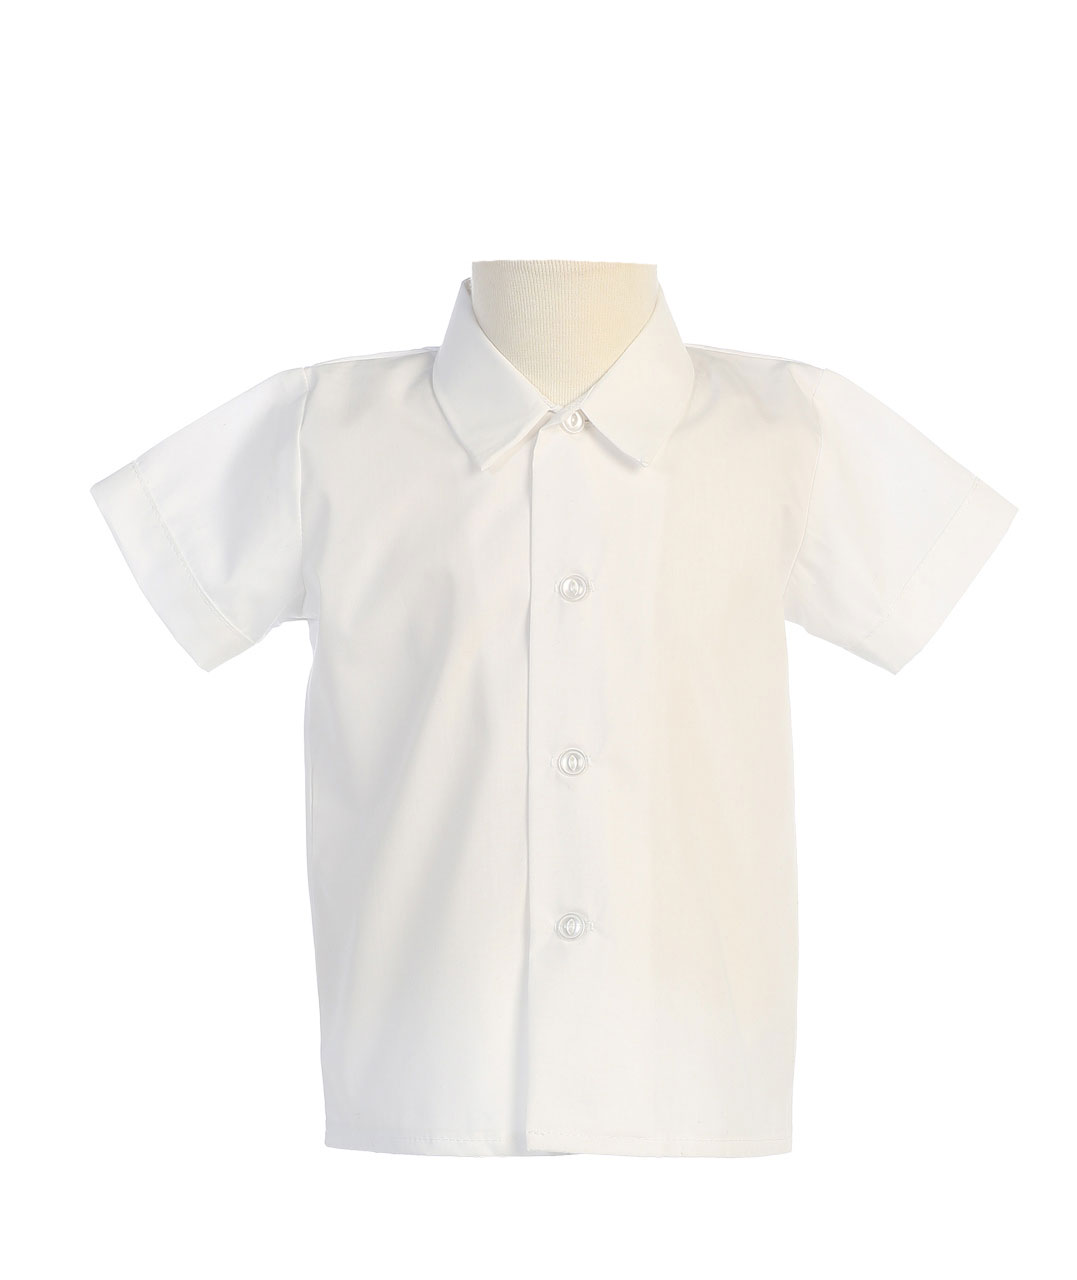 Boys Short Sleeved Simple Dress Shirt - Available in White XL